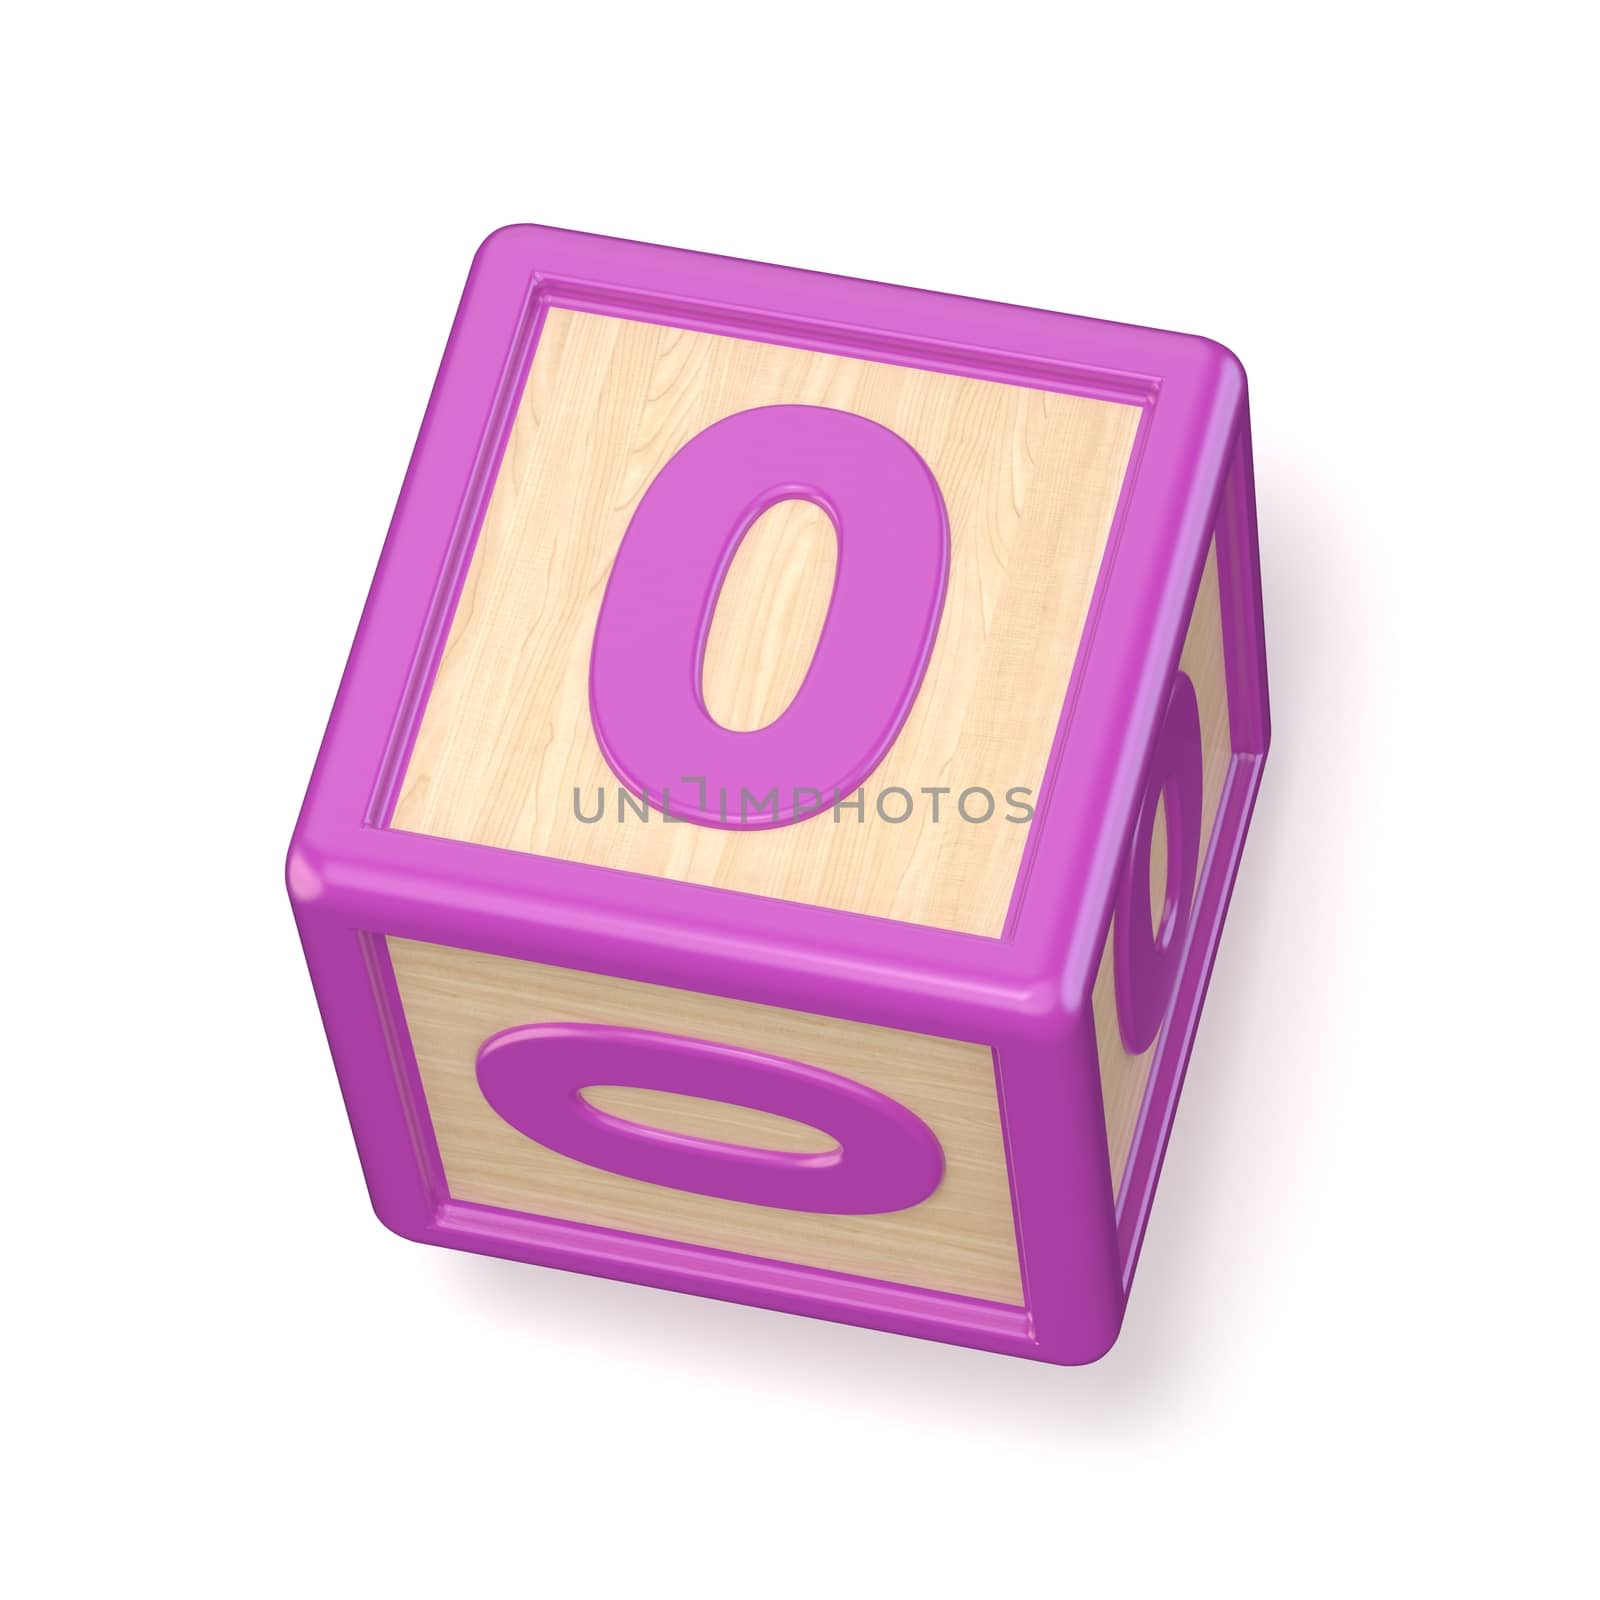 Number 0 ZERO wooden alphabet blocks font rotated. 3D render illustration isolated on white background